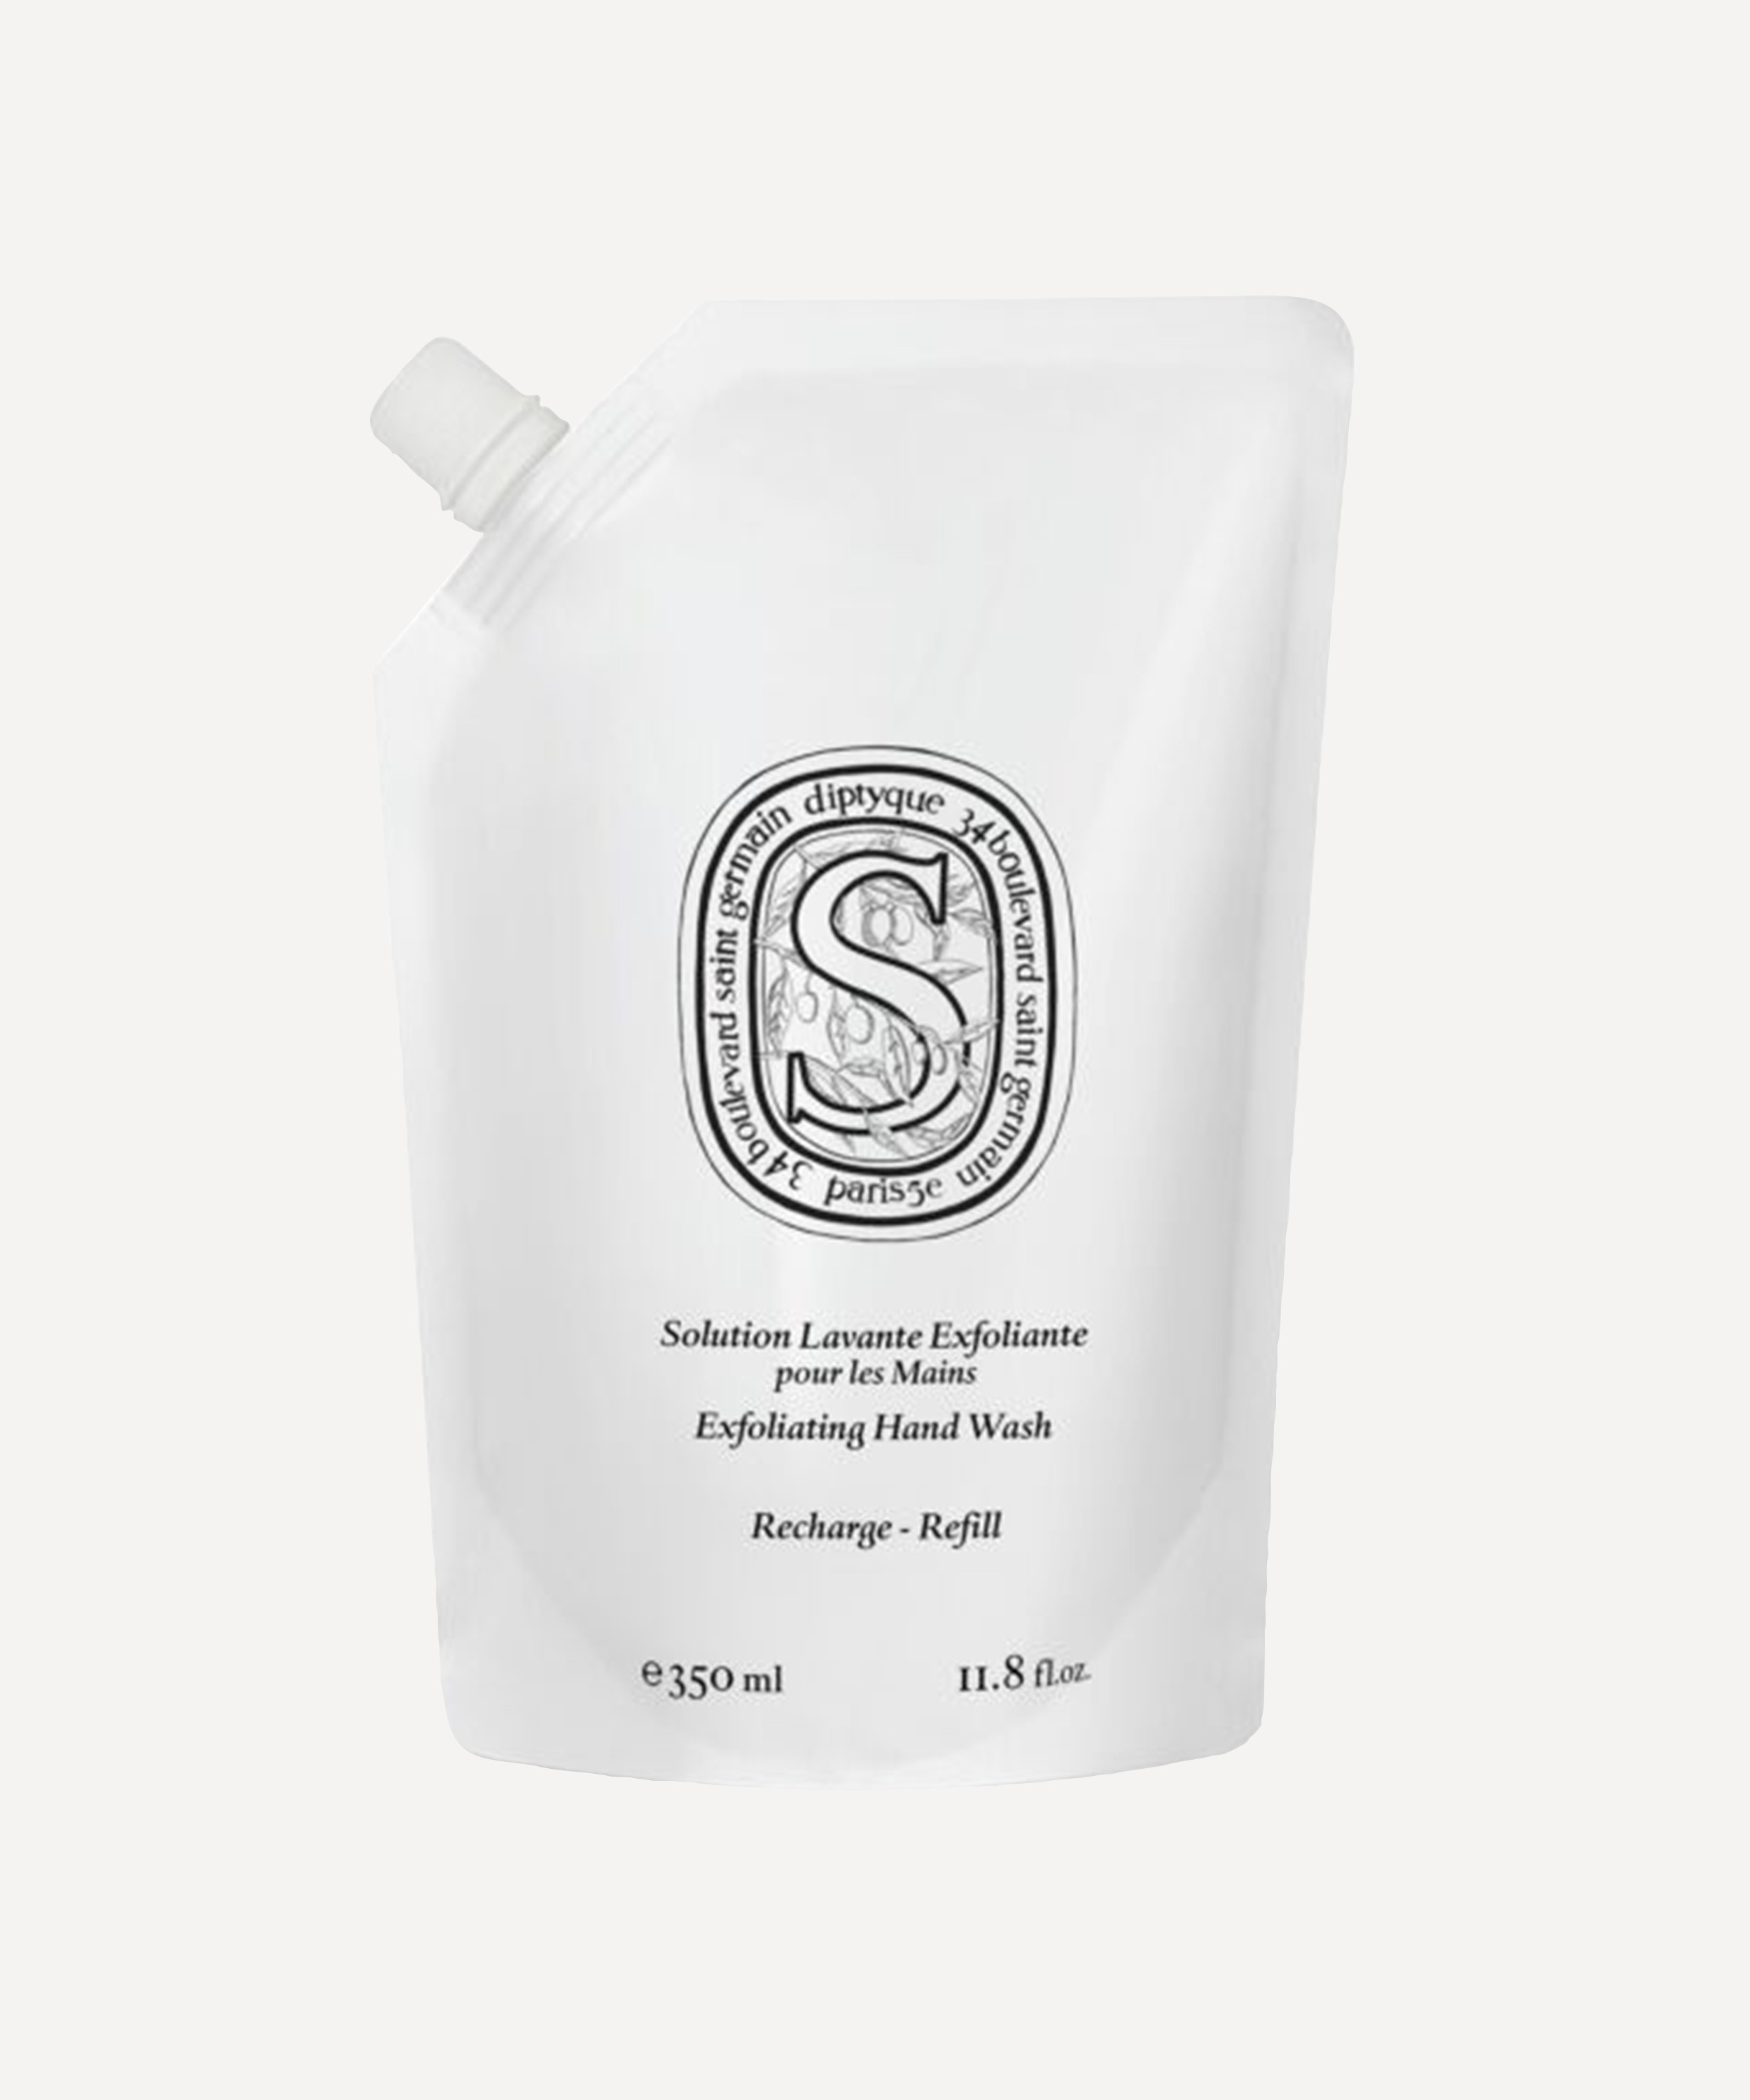 Diptyque - Exfoliating Hand Wash Refill 350ml image number 0